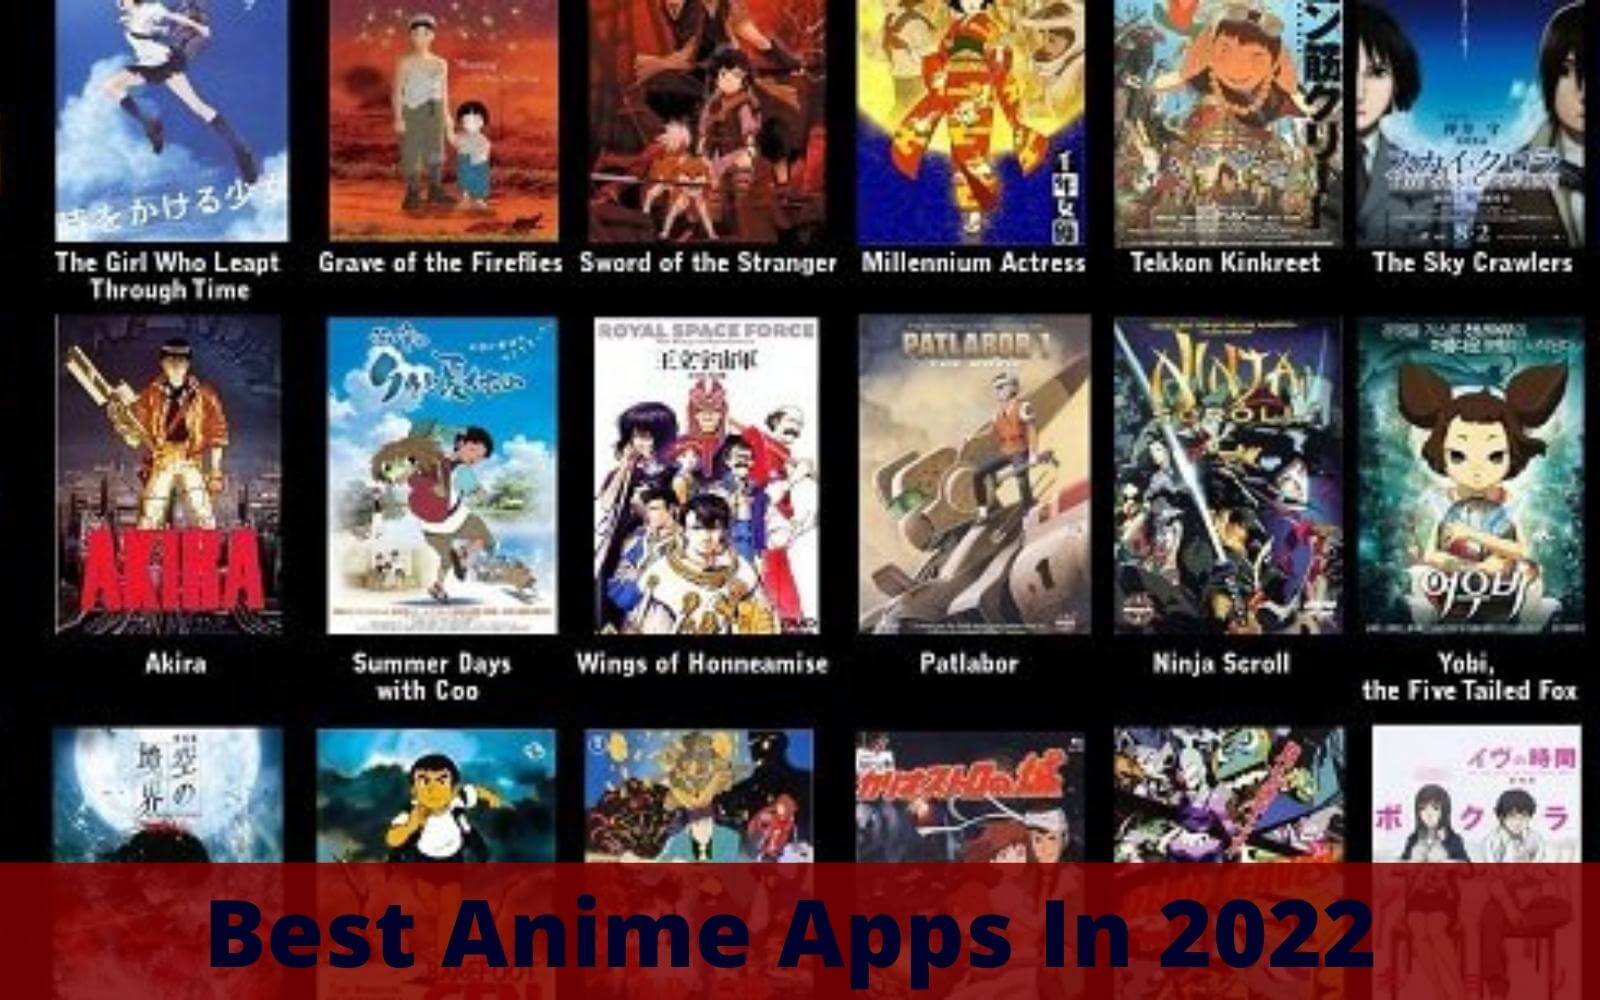 Top 5 Best Anime Apps To Watch Anime In 2022